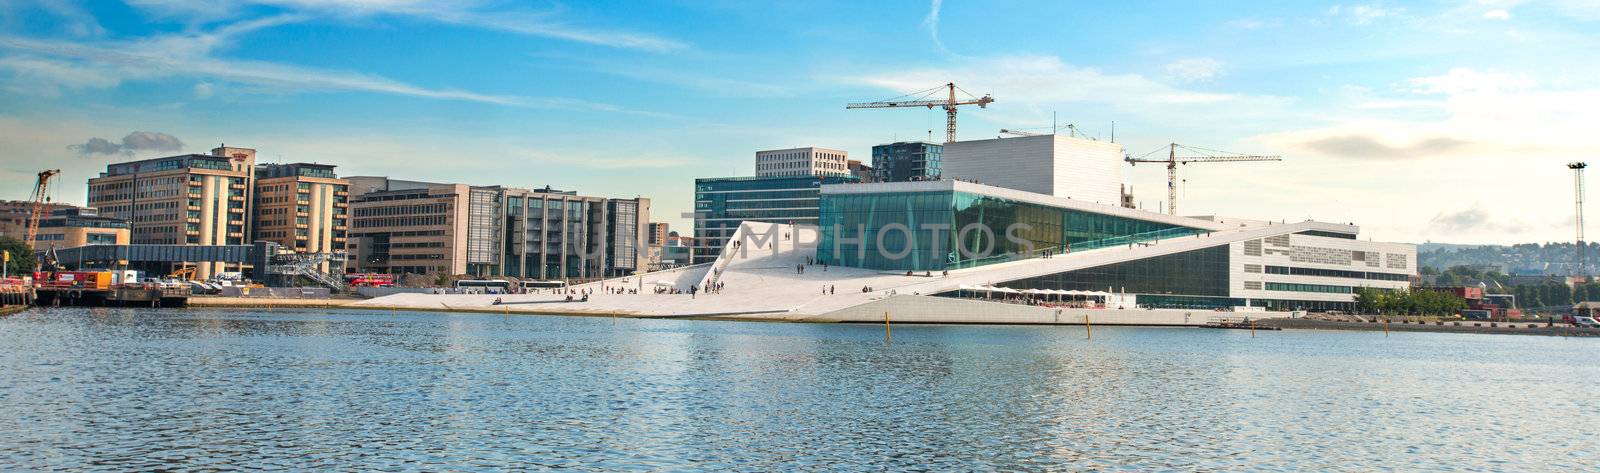 OSLO, NORWAY - AUGUST 13: View on a side of the National Oslo Opera House on August 13, 2012, which was opened on April 12, 2008 in Oslo, Norway